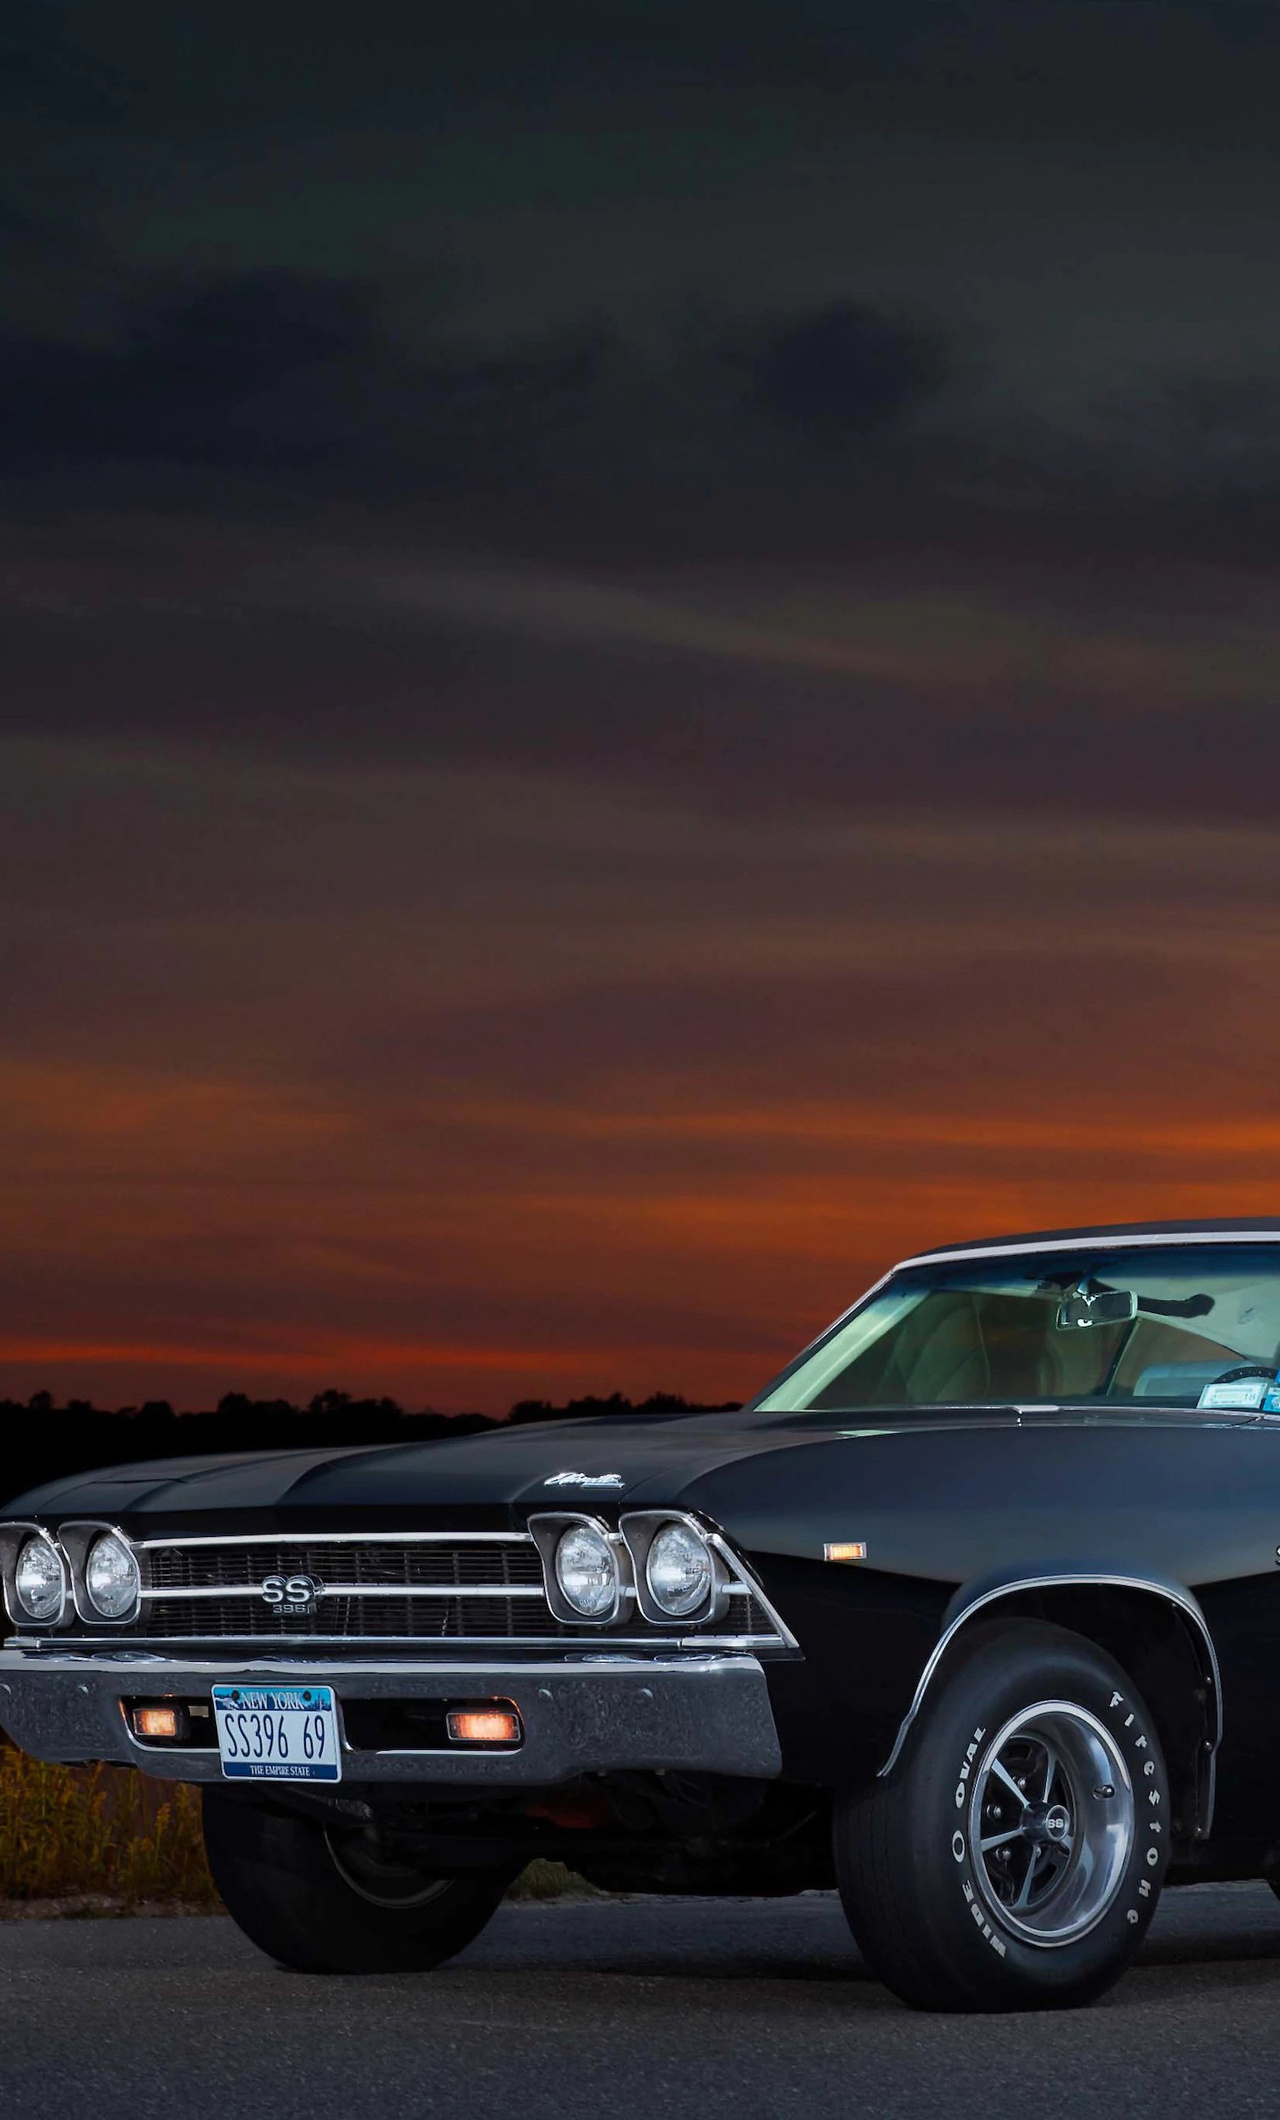 1969 Chevrolet Chevelle, SS 396 cid, Retro fascination, Muscle car wallpapers, iPhone, 1280x2120 HD Handy